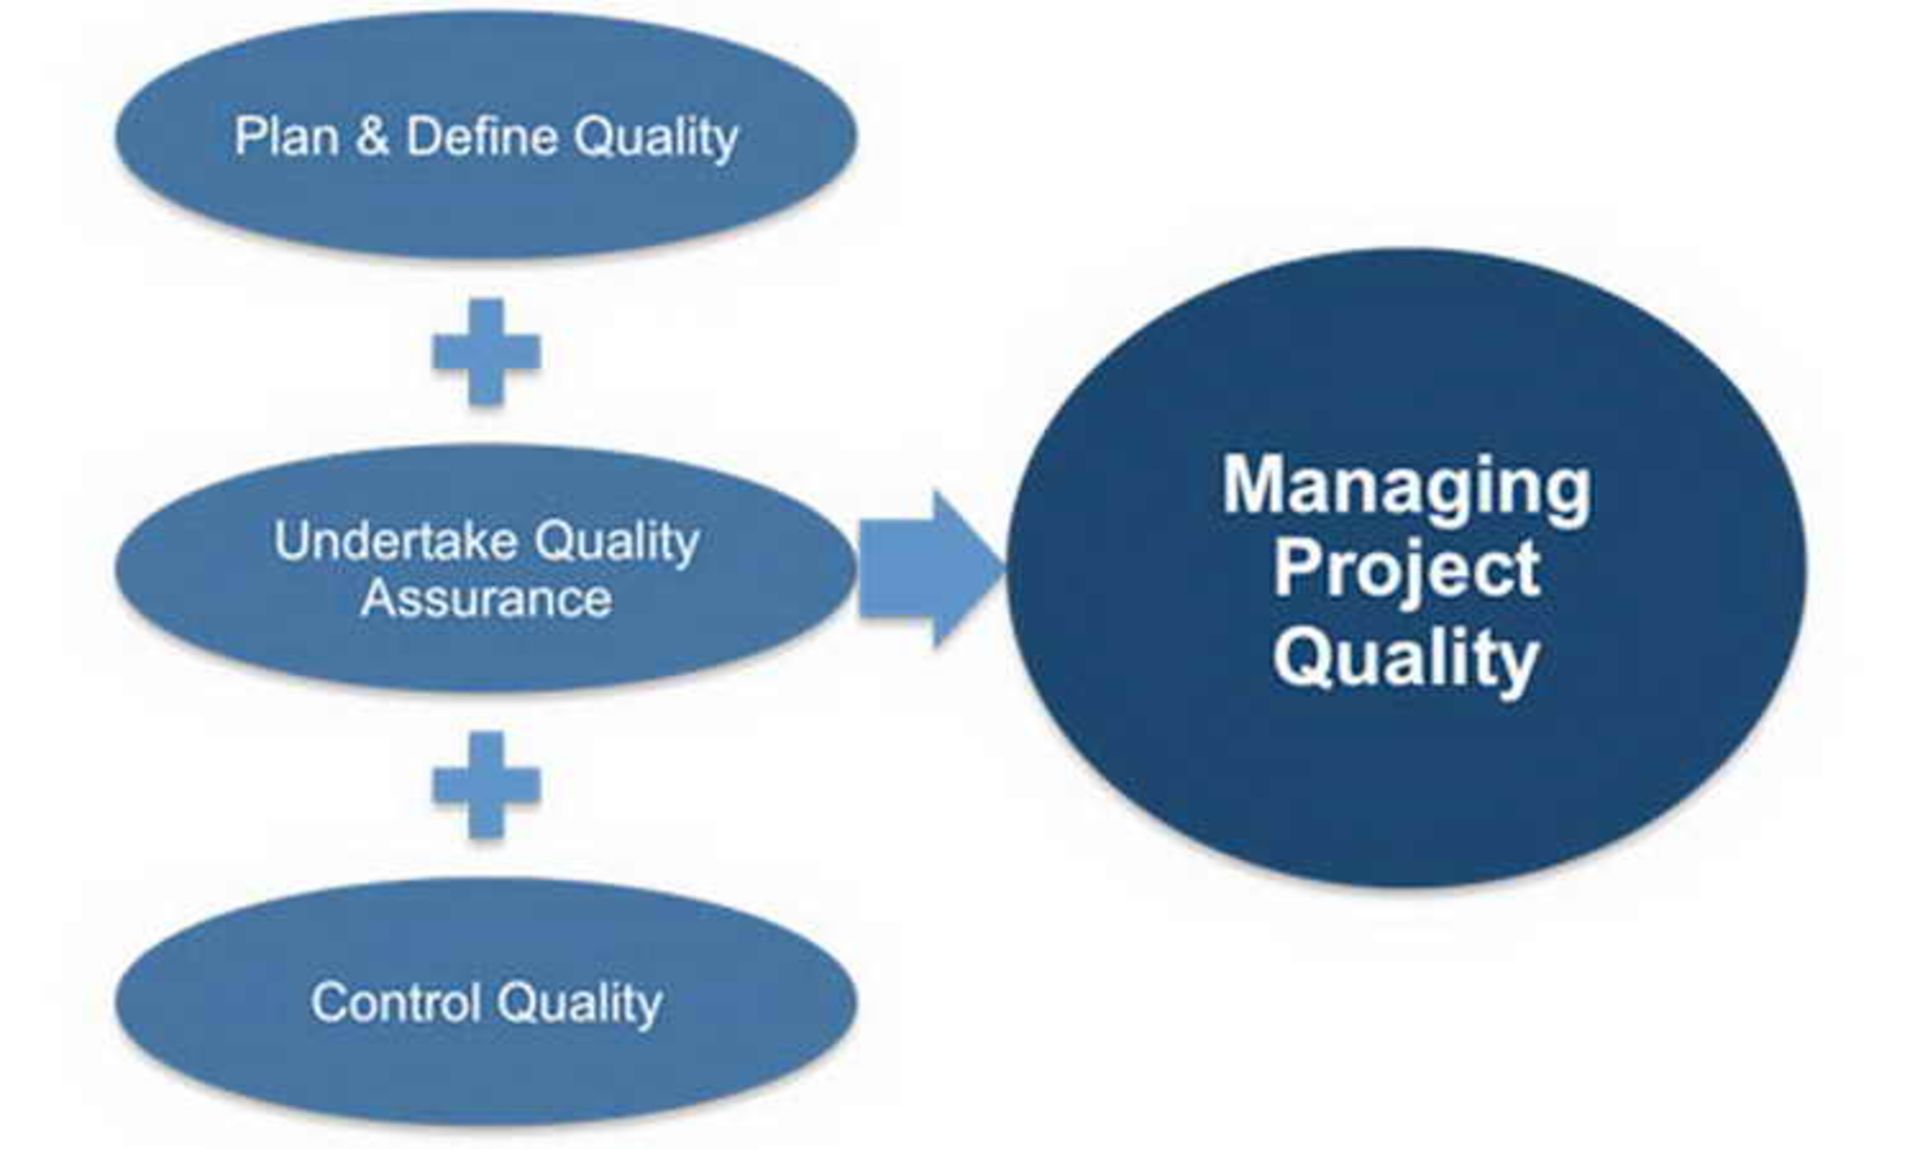 Quality Management for Projects